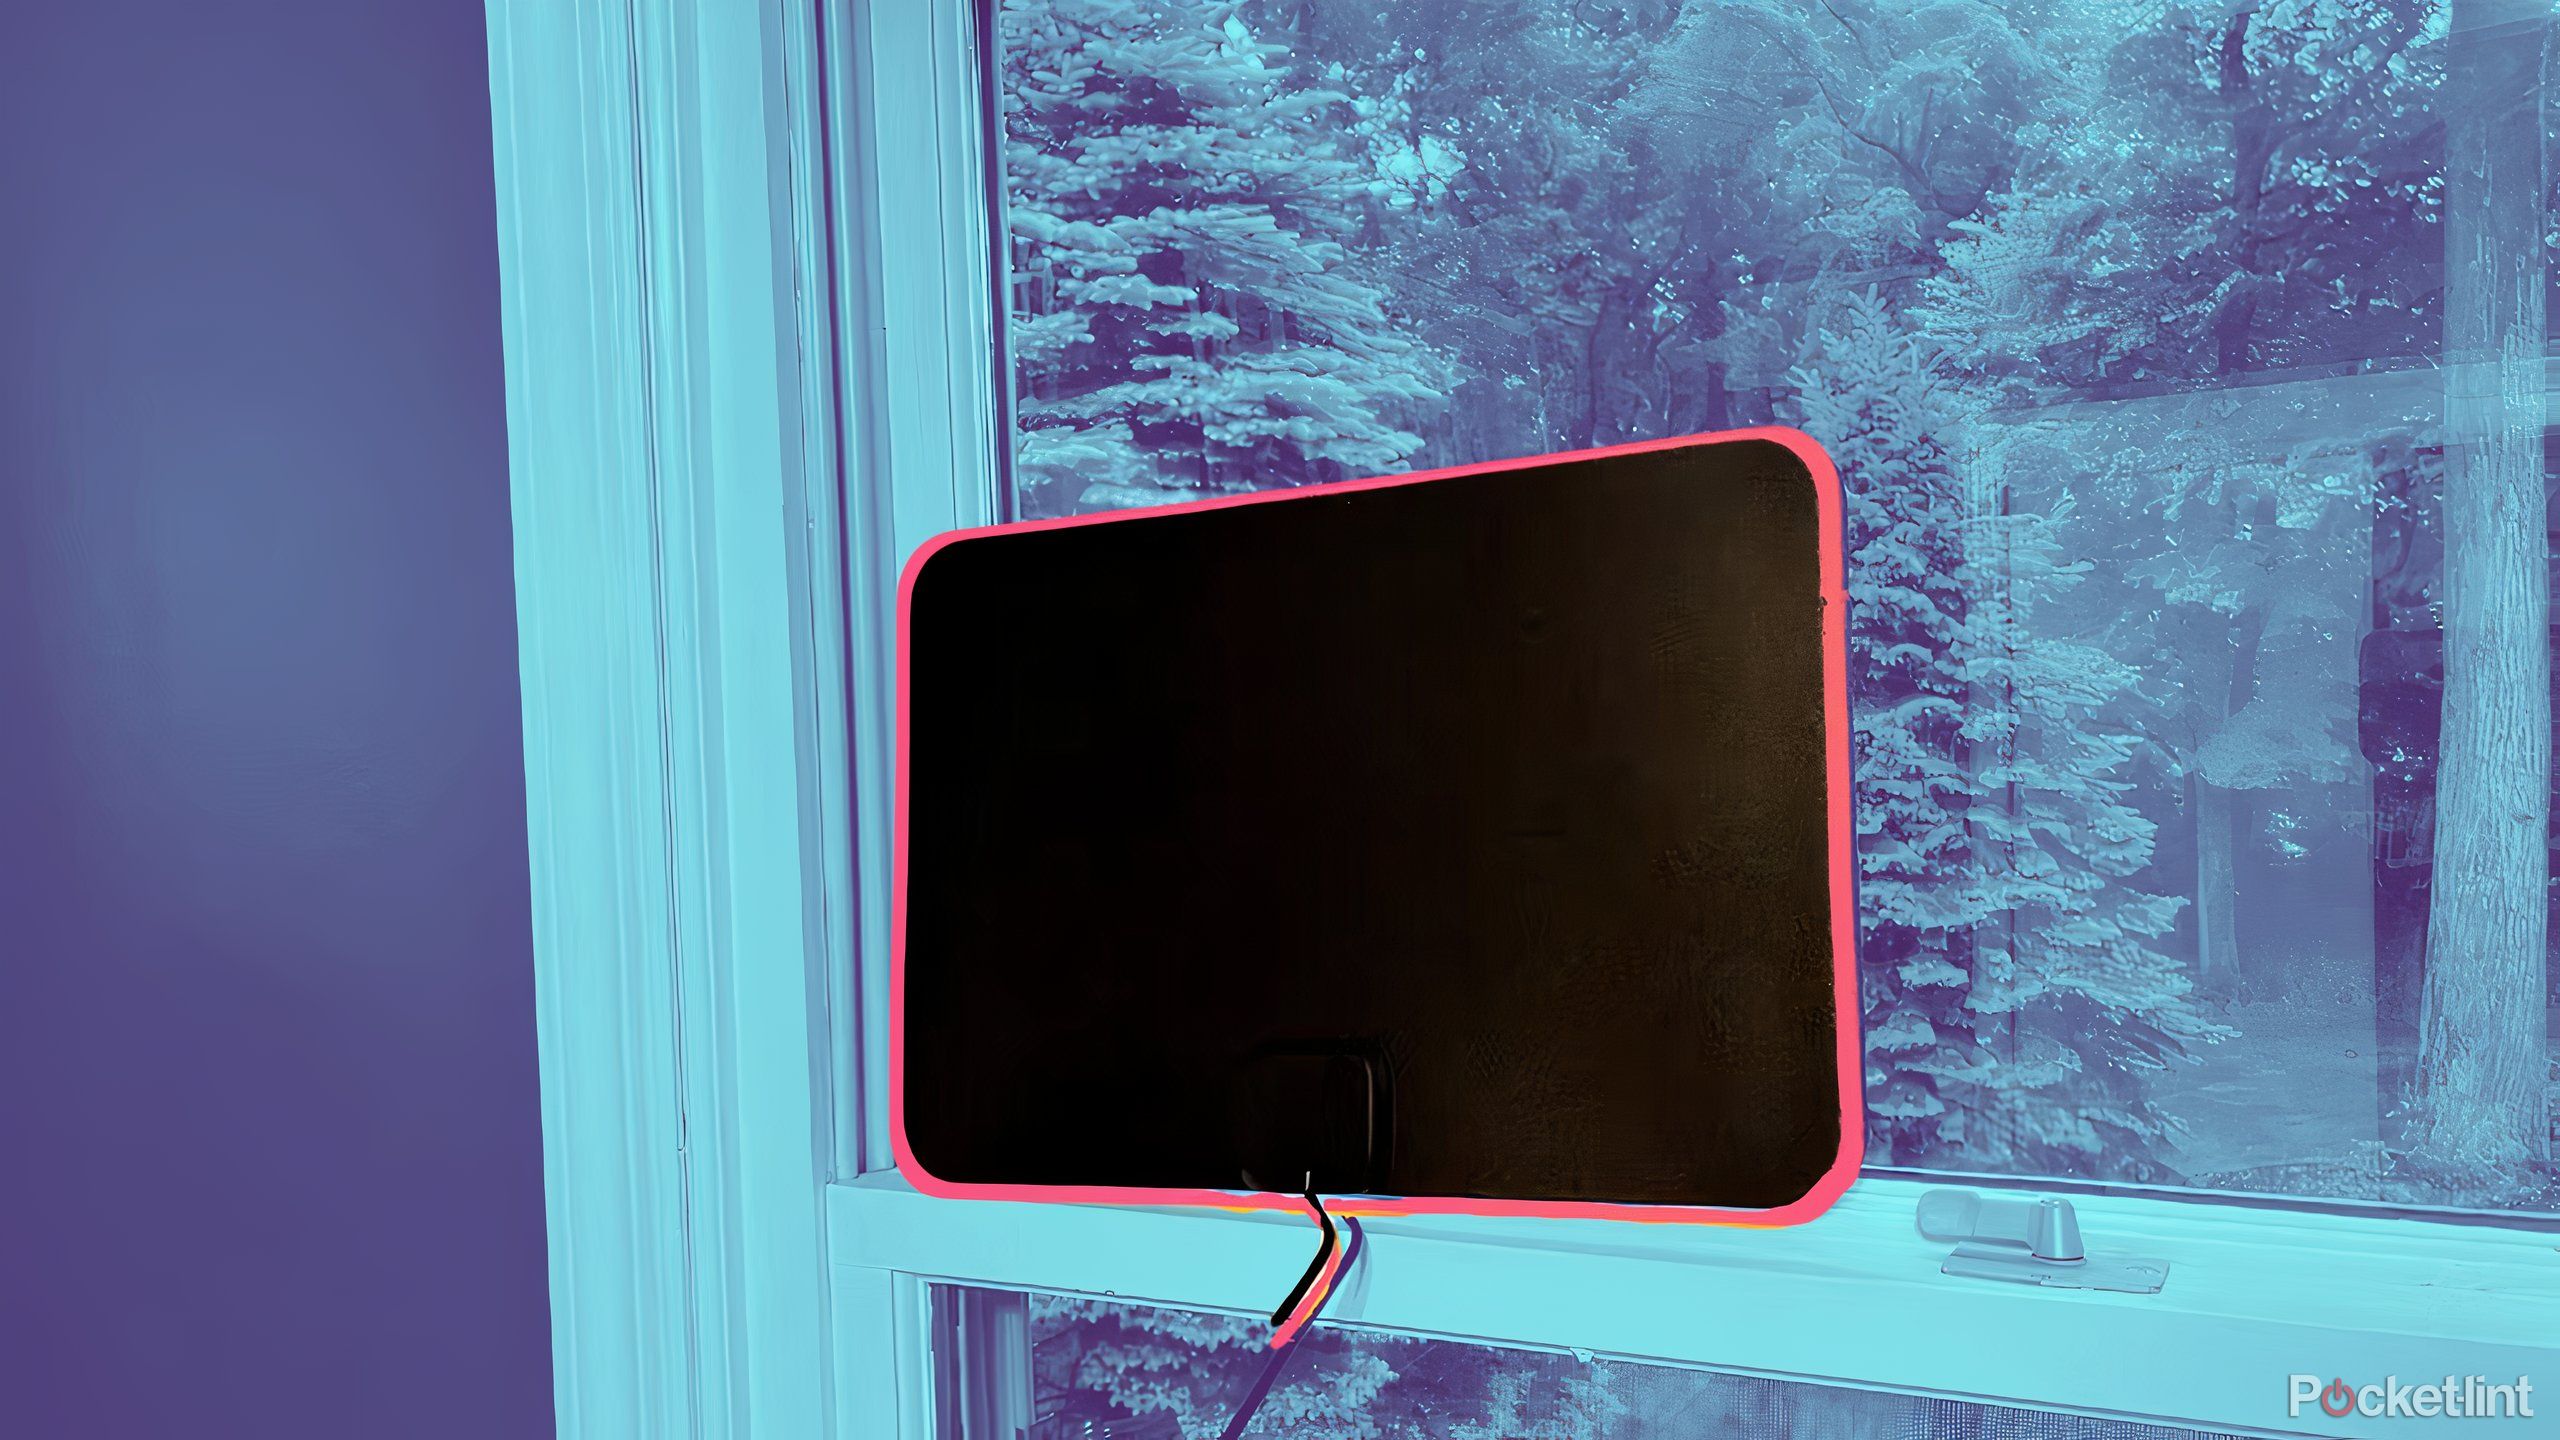 Gesobyte digital TV antenna review: A free cable solution?